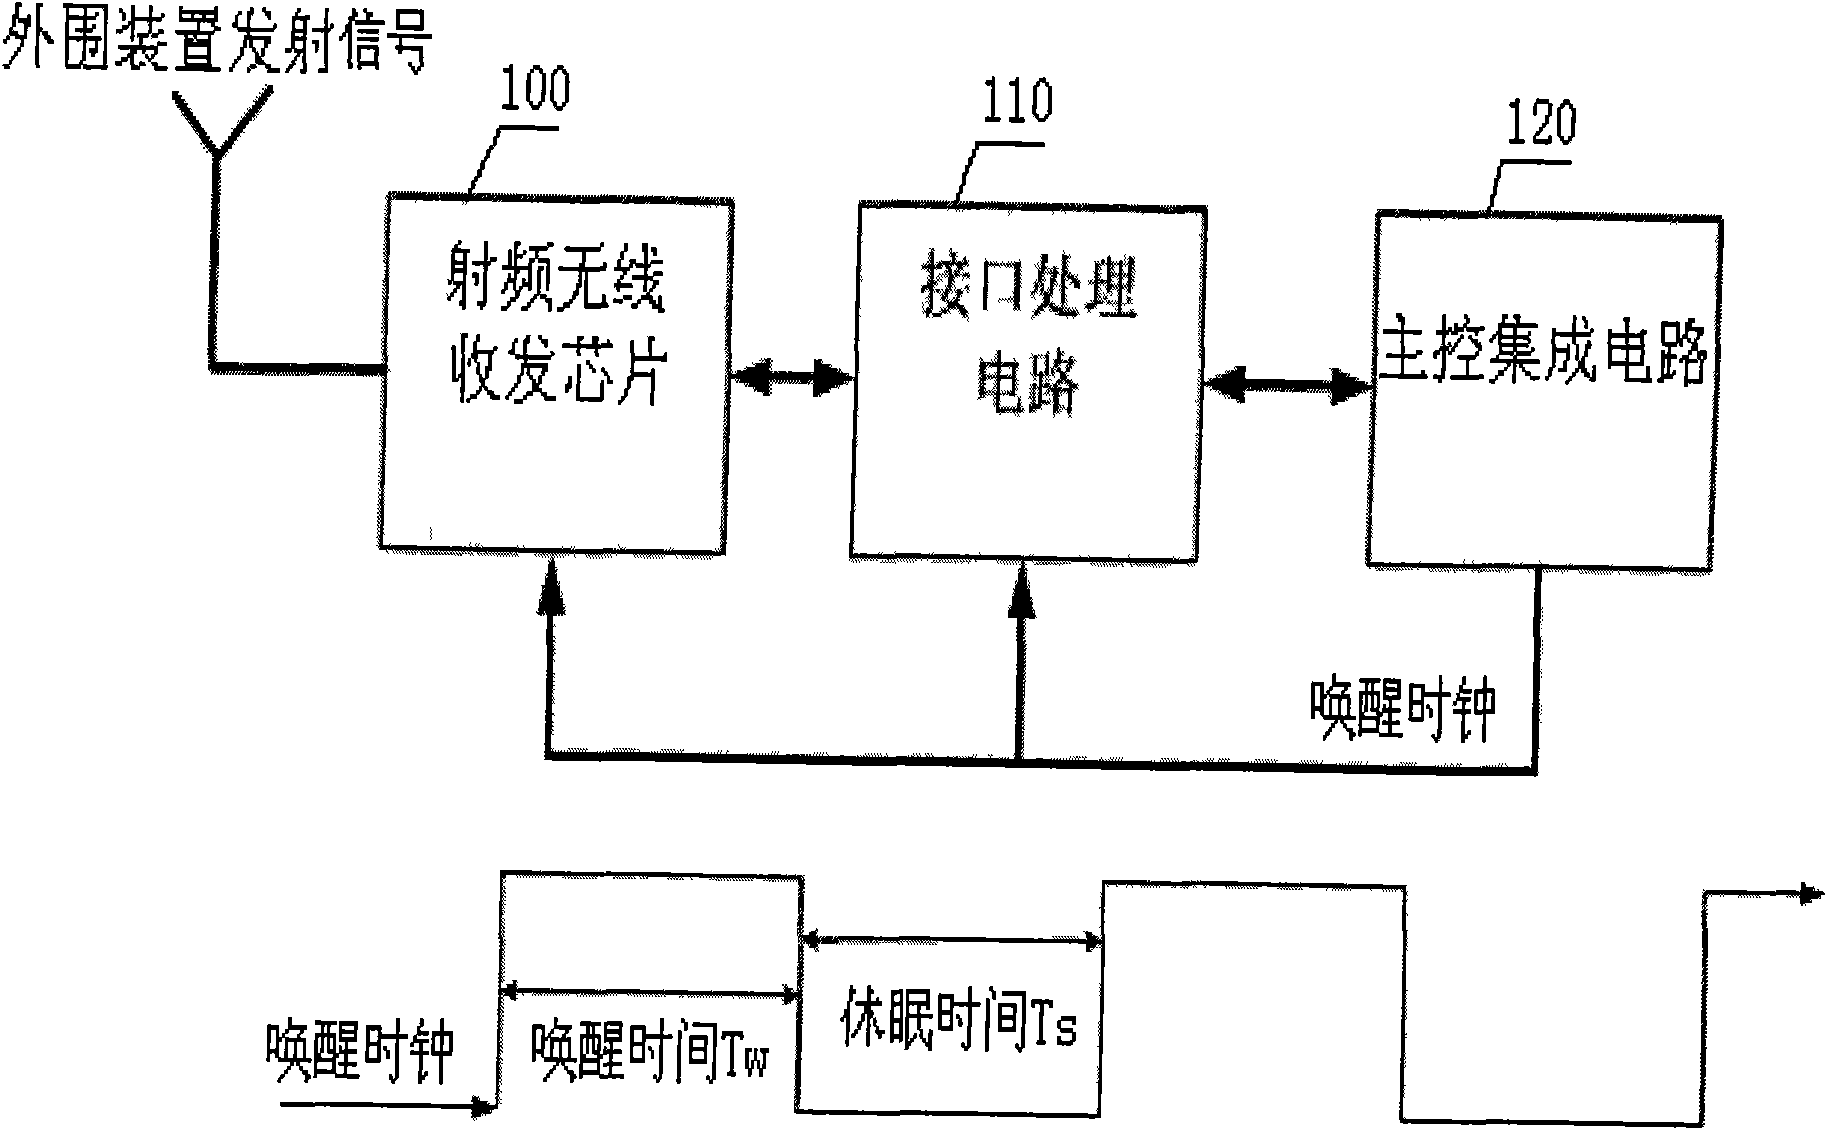 Method for reducing power consumption of radio-frequency SIM card in standby mode